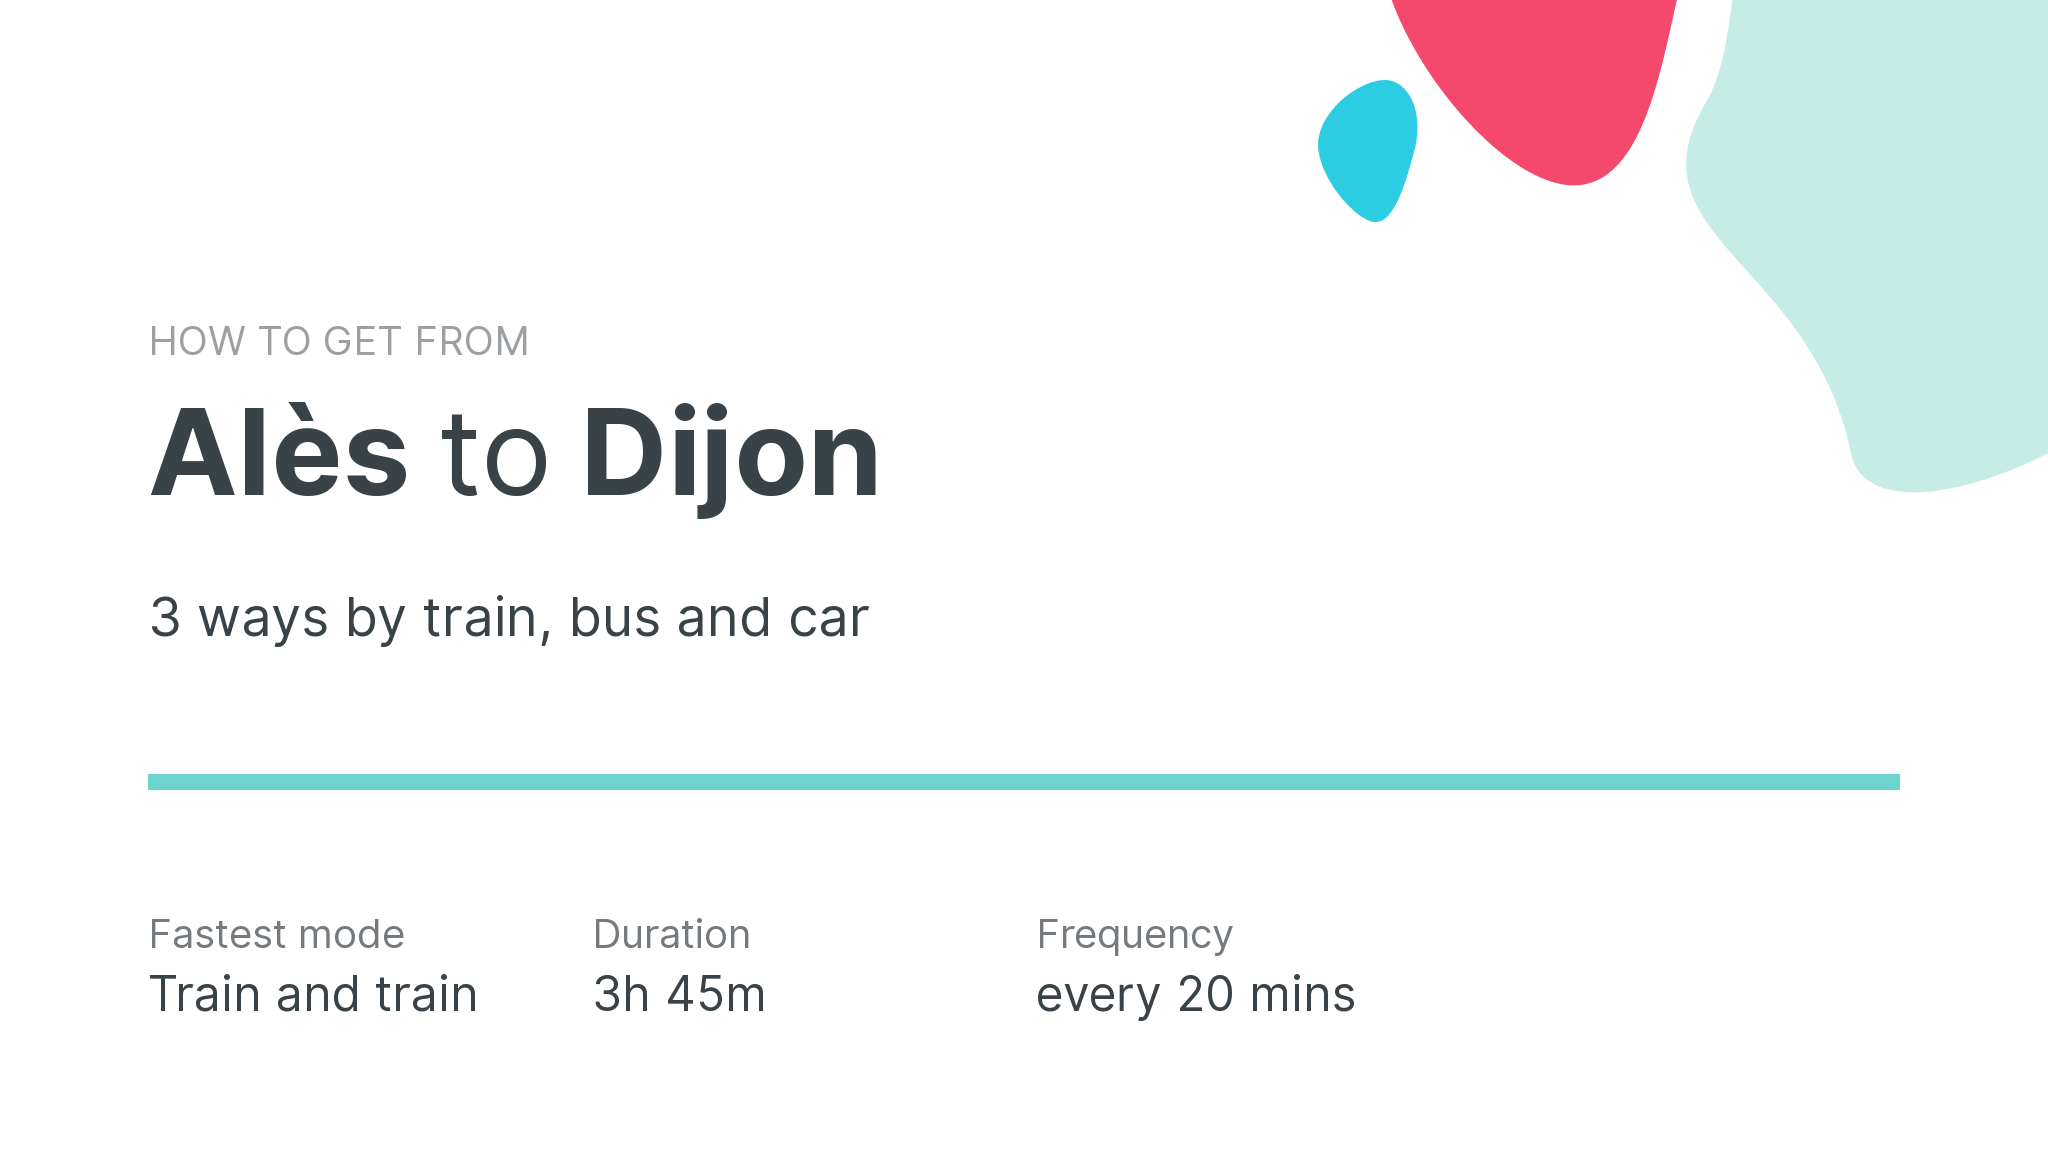 How do I get from Alès to Dijon